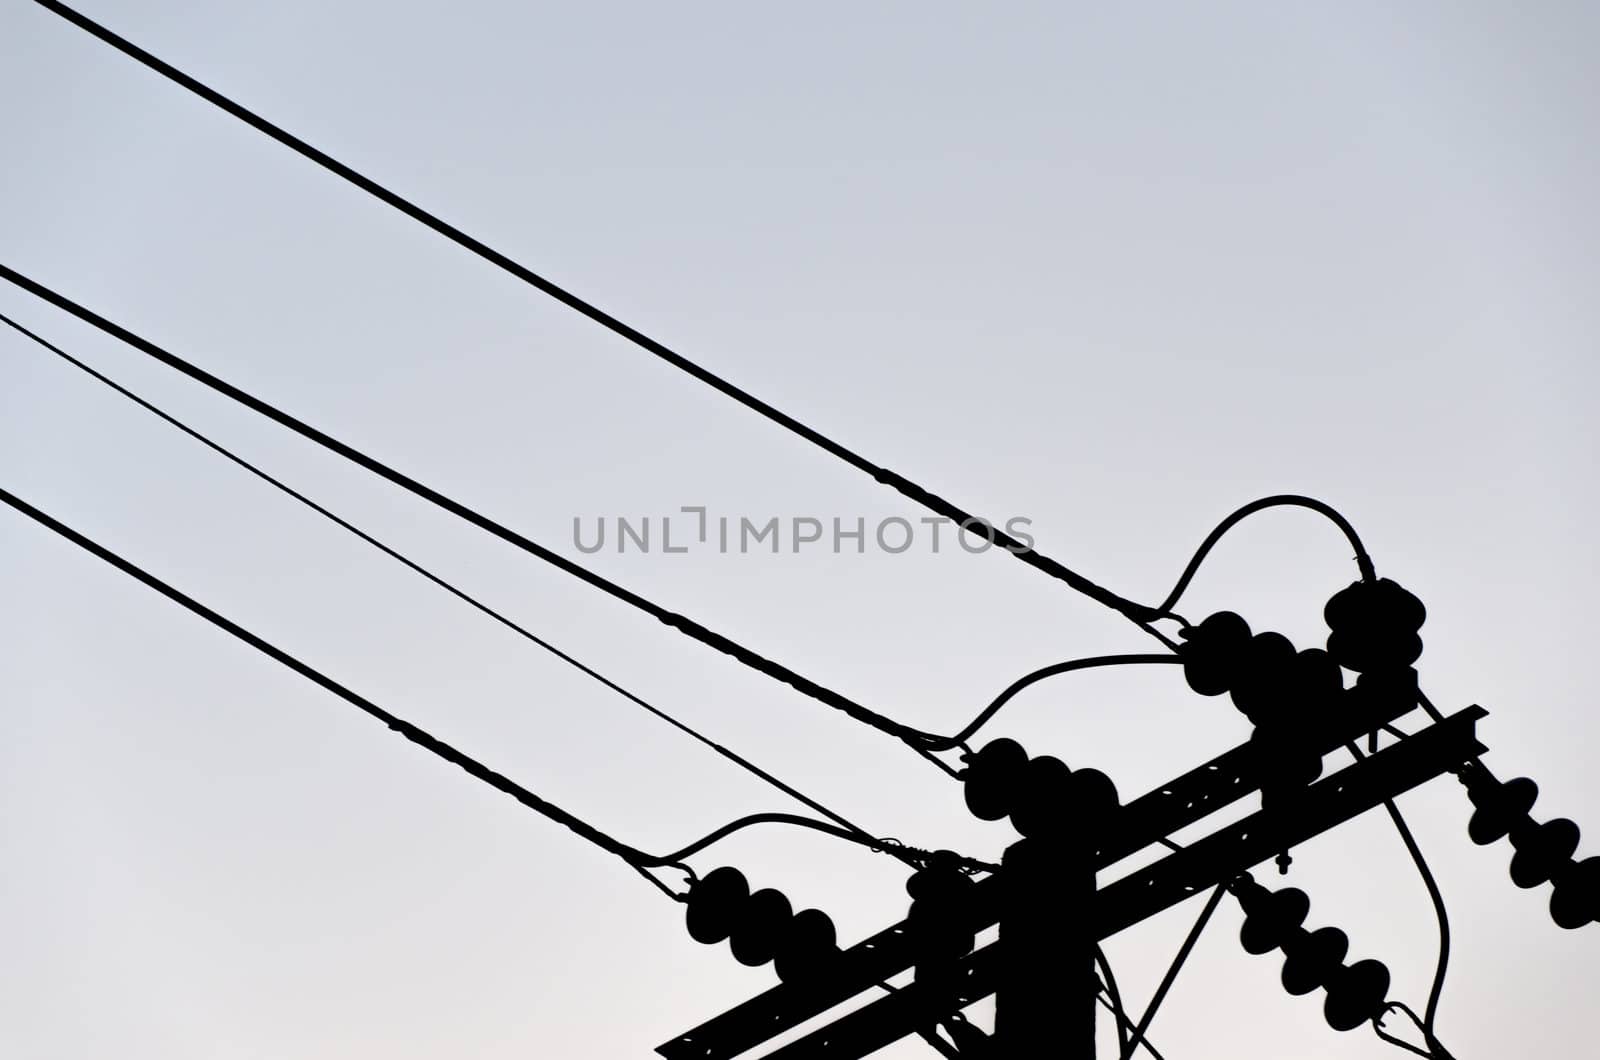 Silhouette electricity post by Premmystock